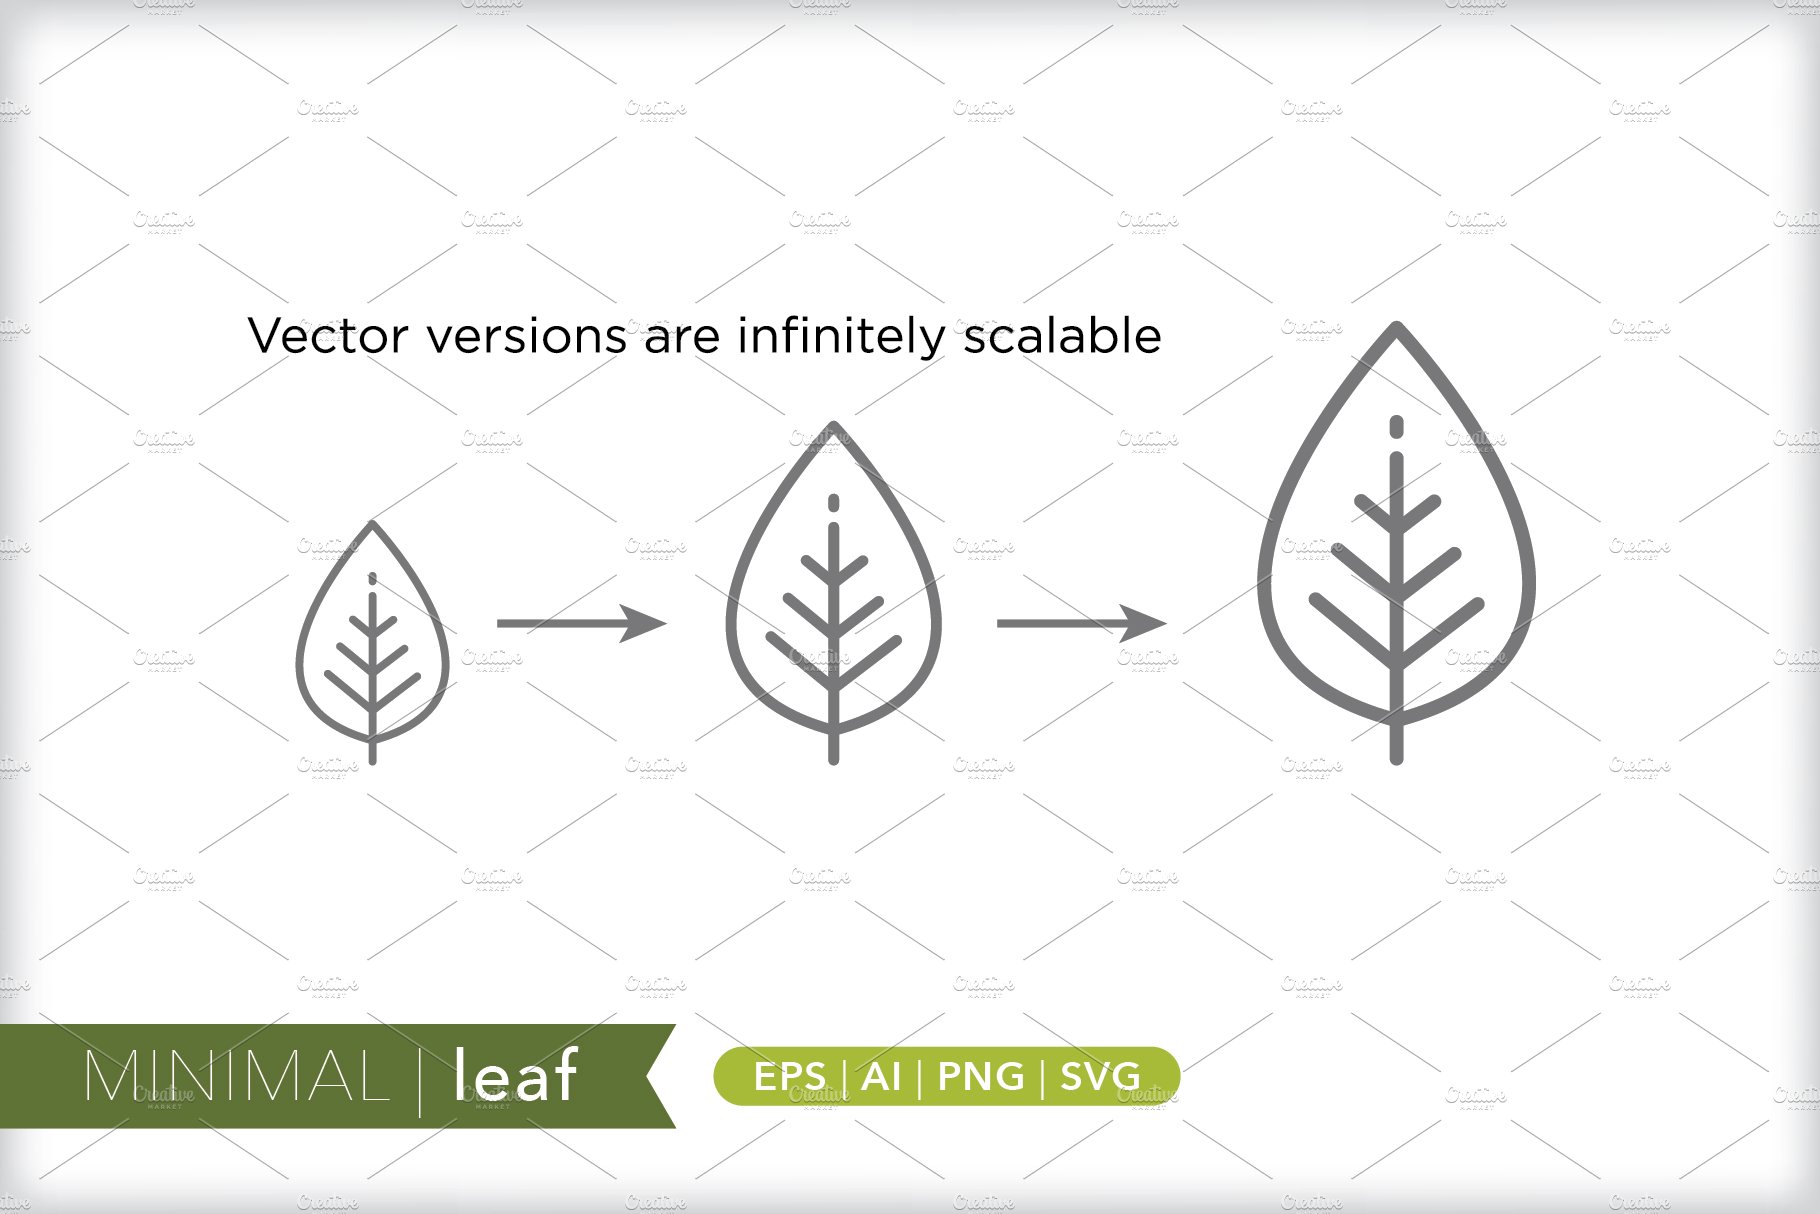 Minimal leaf icons preview image.